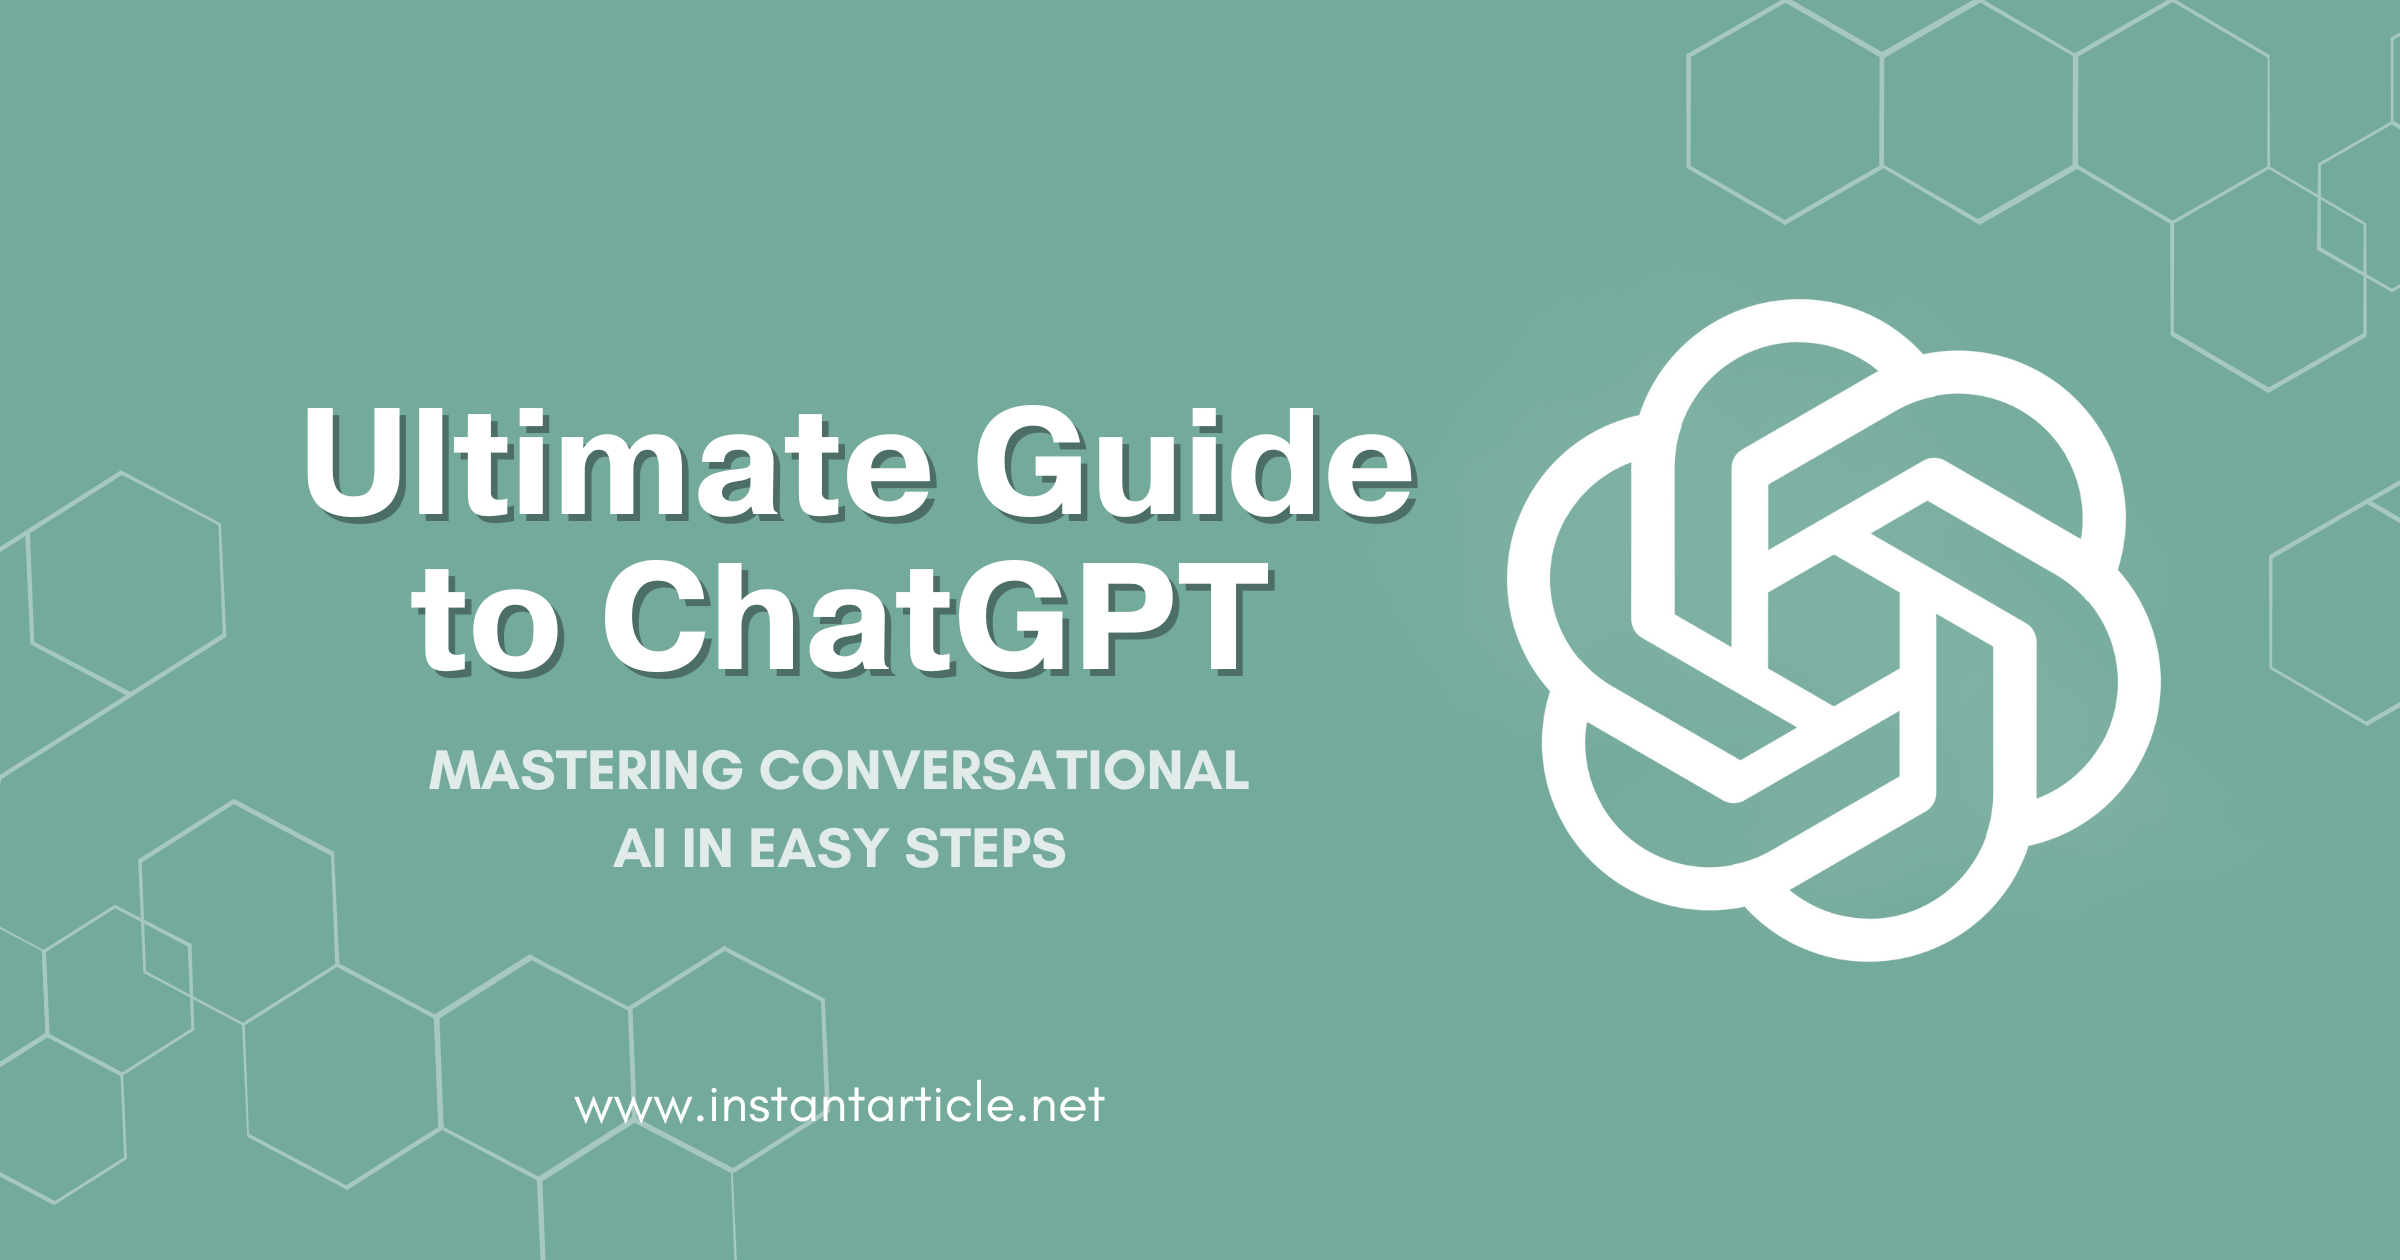 Ultimate Guide to ChatGPT